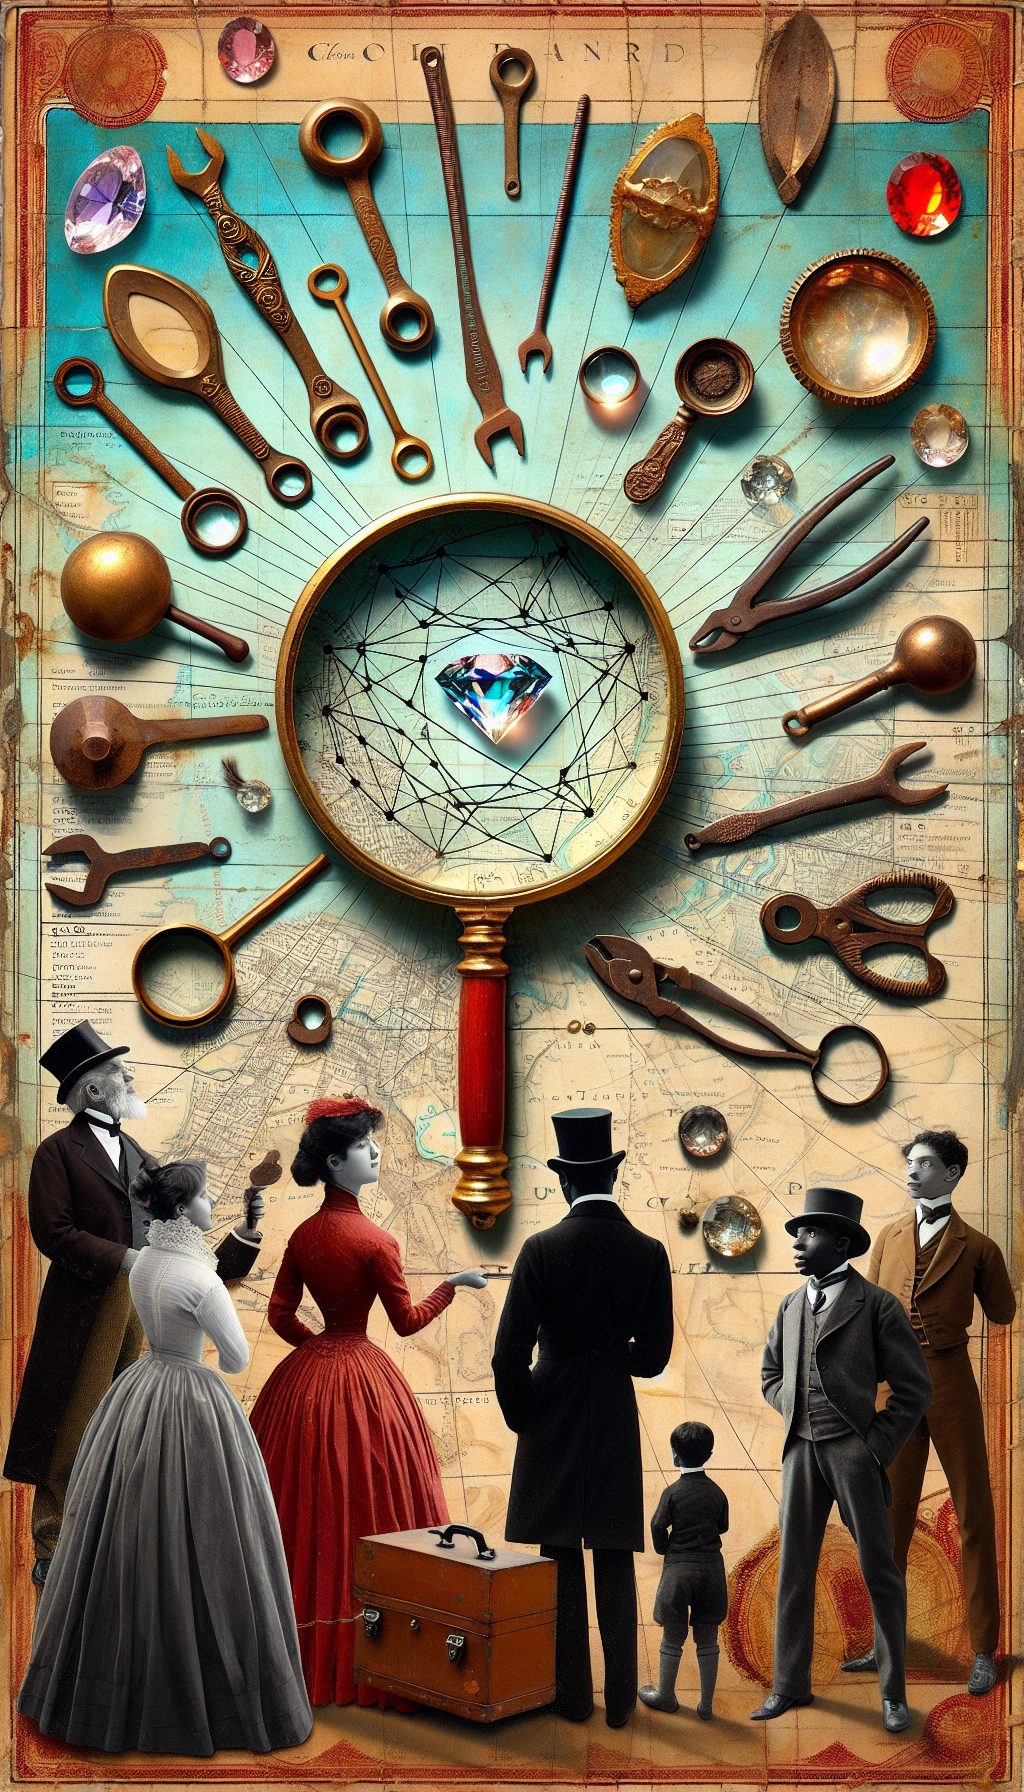 In a whimsical, mixed-media collage, an antique magnifying glass hovers over a map strewn with vintage hand tools, each casting a shadow of a rare gem. Intricate lines connect the tools with their identifying features written in elegant script, while curious characters in Victorian attire examine these find with awe, symbolizing the collector's insight into the world of rare treasures.